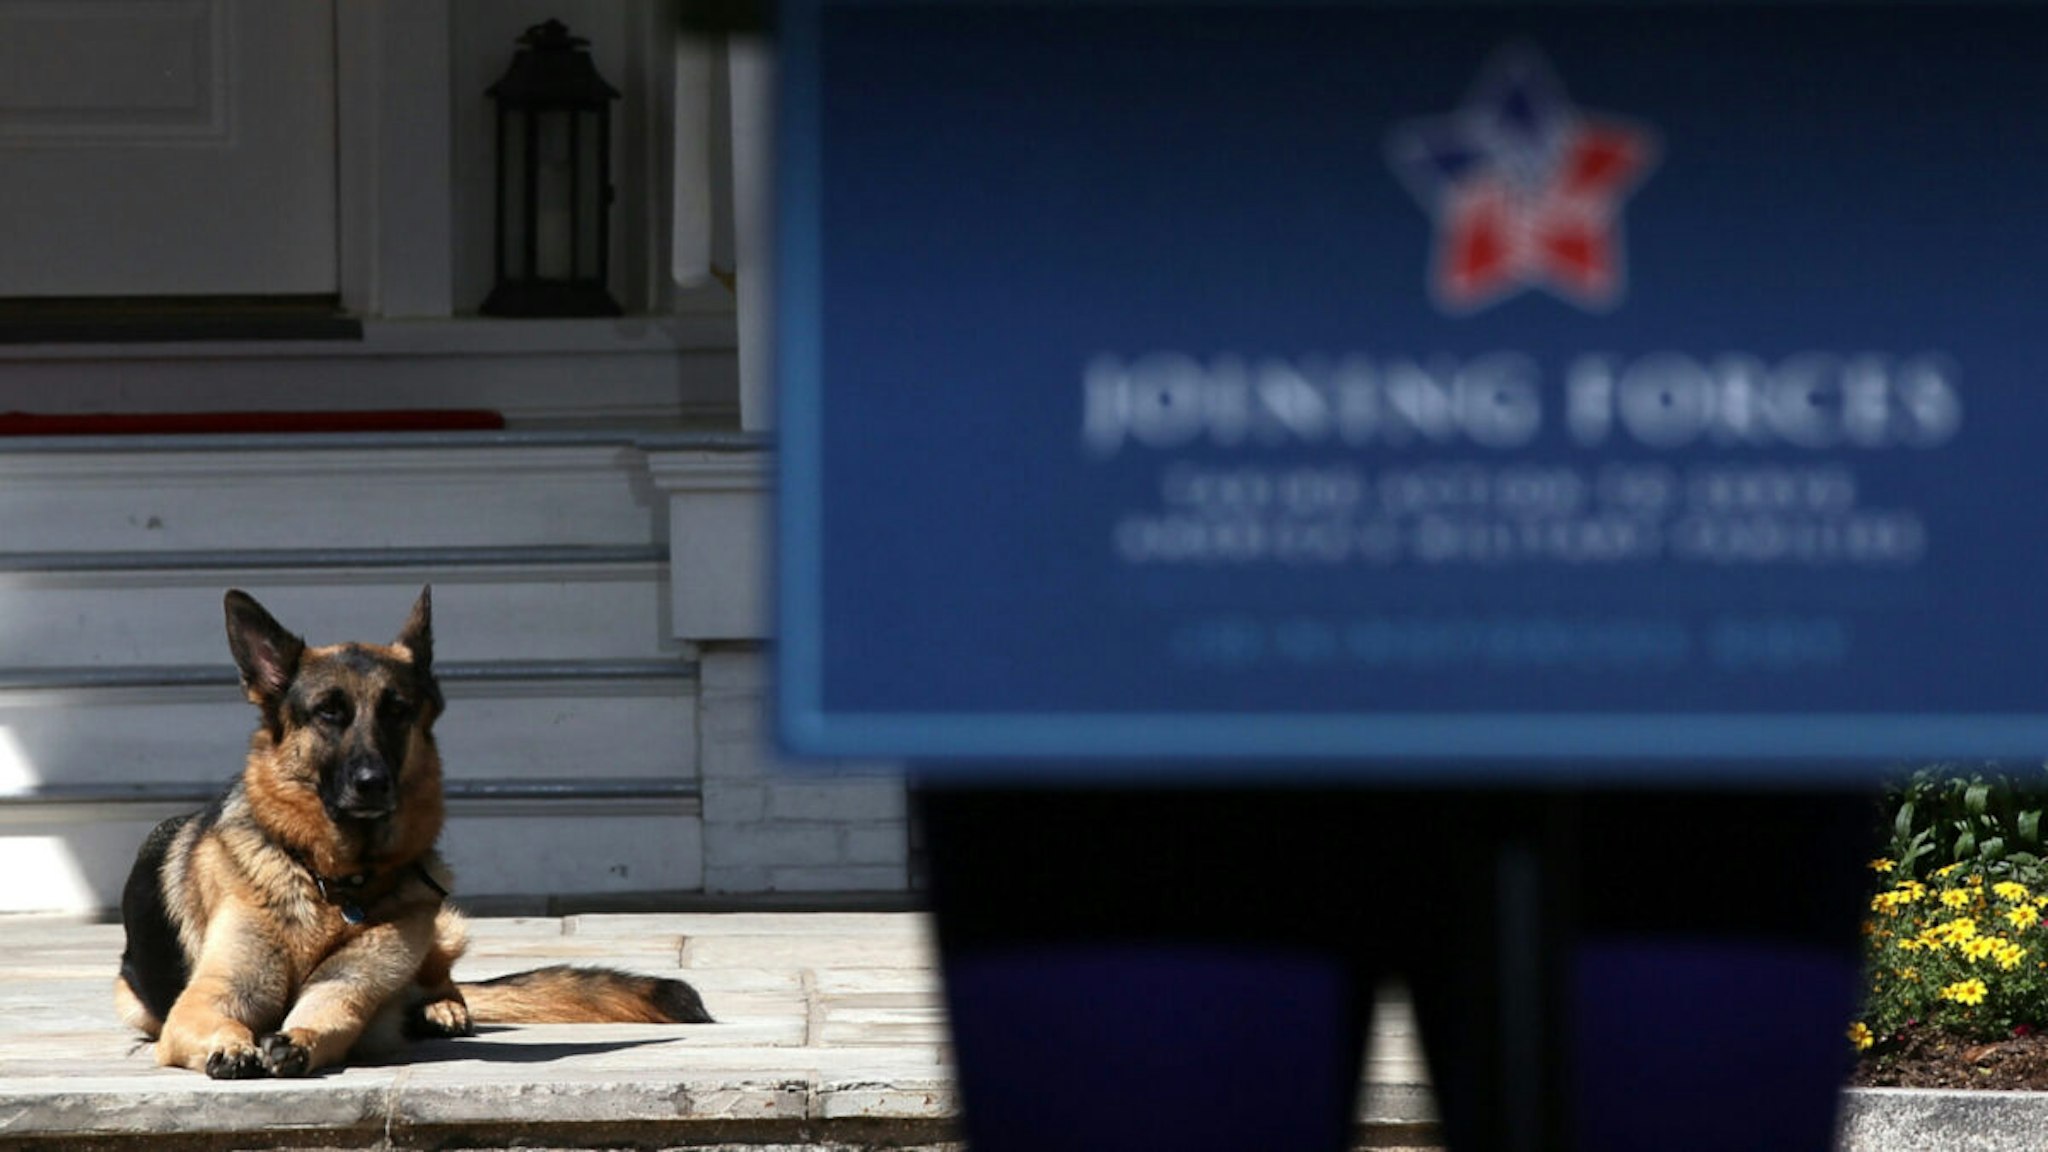 Vice President Joe Biden's dog, Champ, lays down during speechs during a Joining Forces service event at the Vice President's residence at the Naval Observatory May 10, 2012 in Washington, DC.